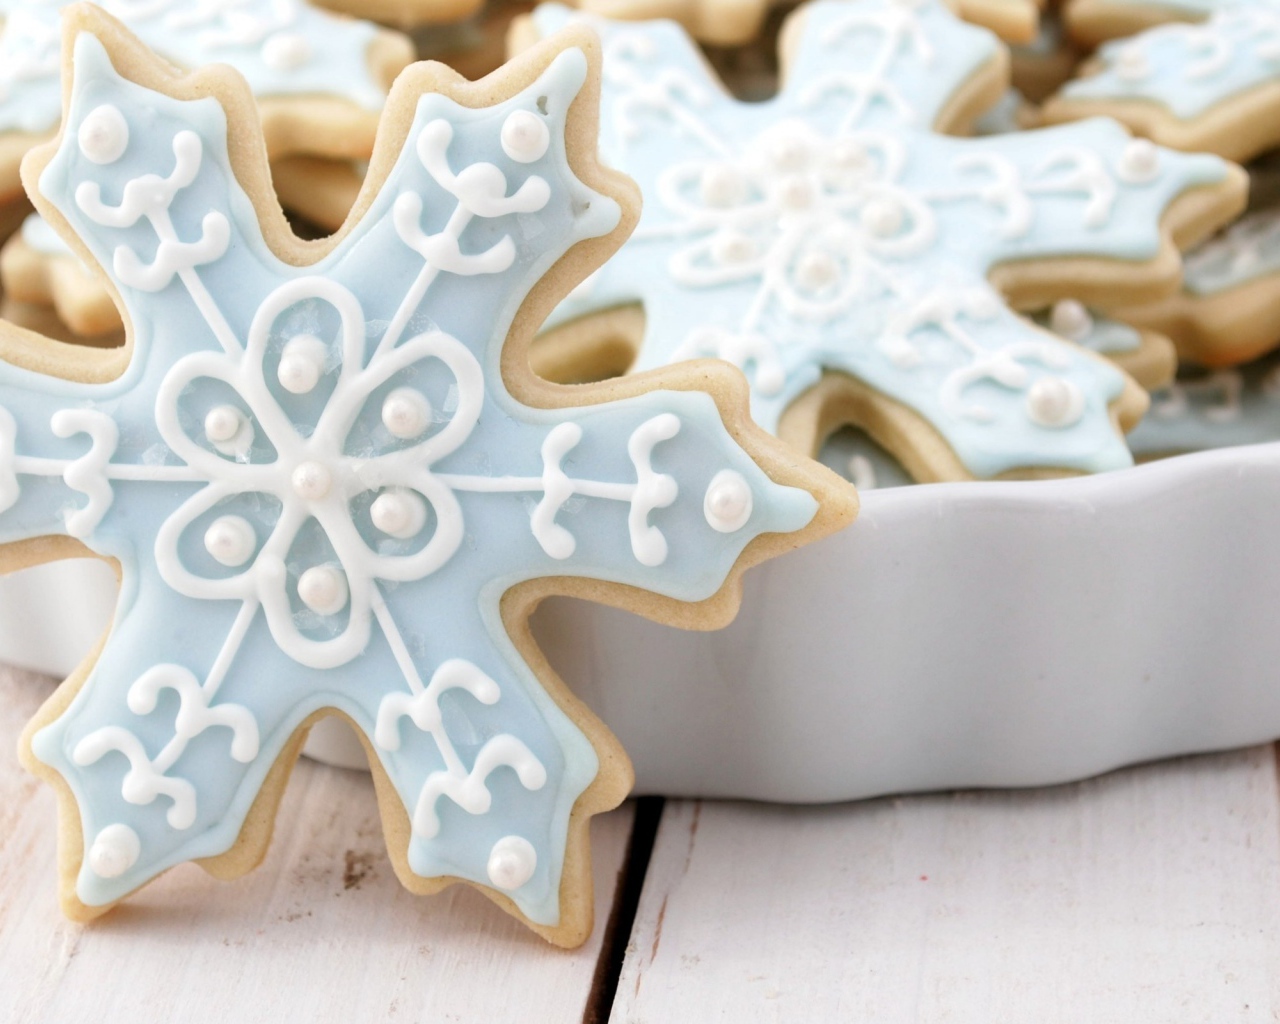 Cookies in the form of snowflakes on Christmas